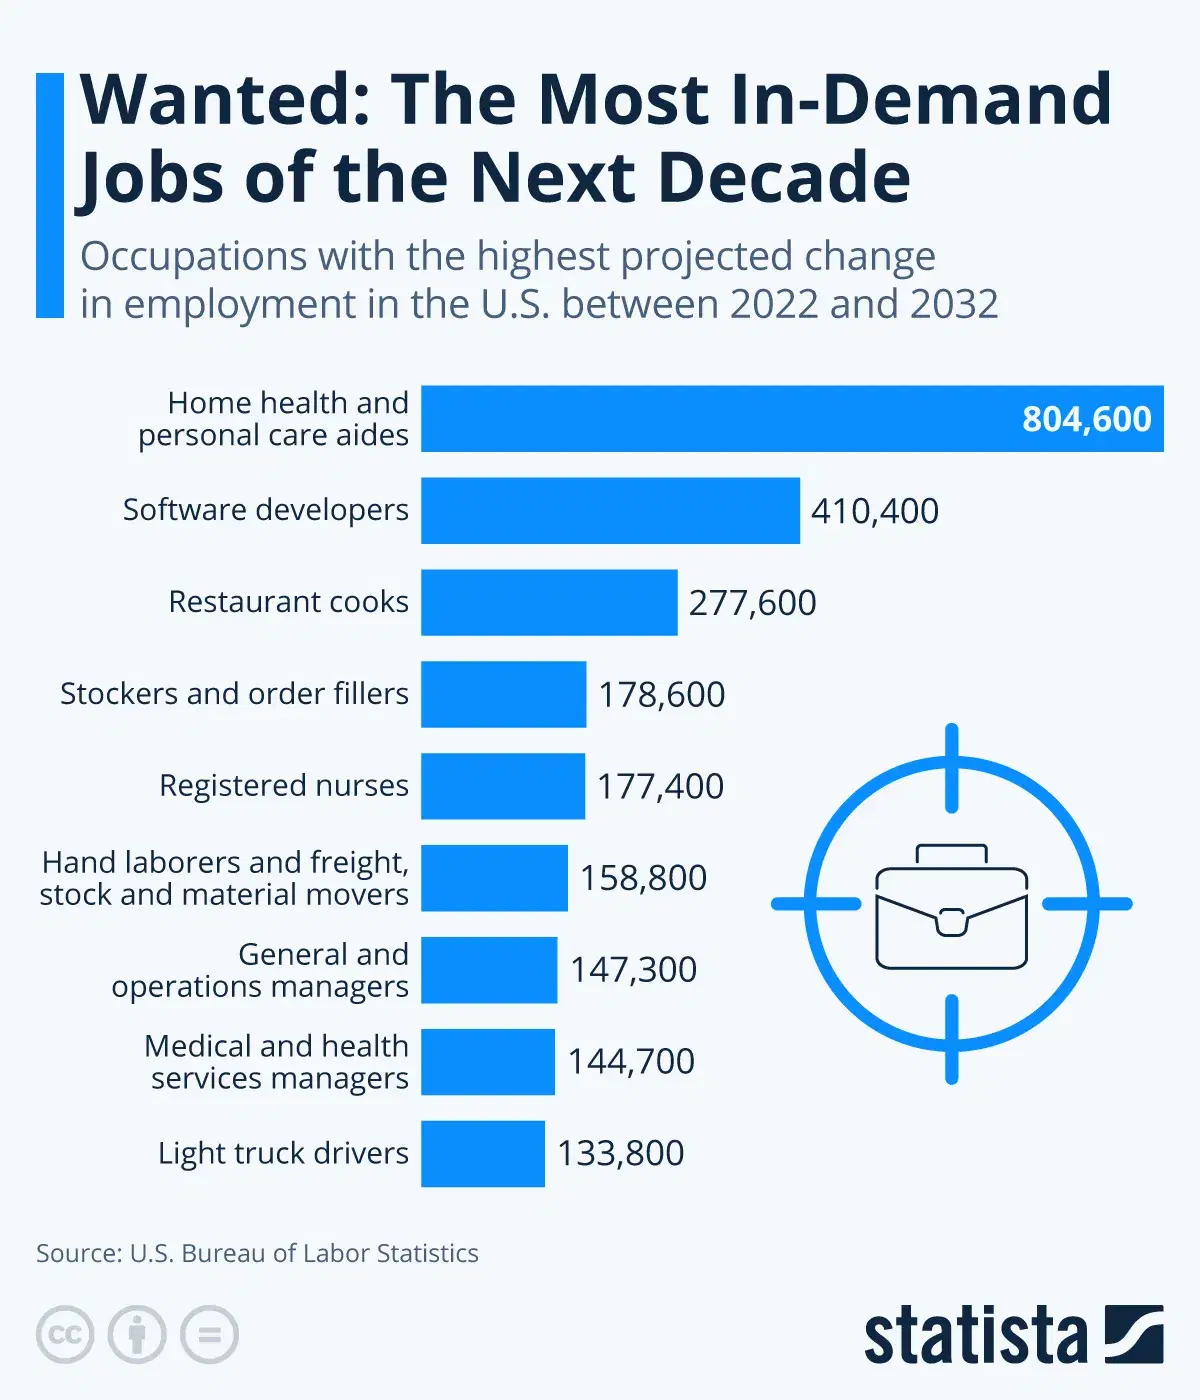 Wanted: The Most In-Demand Jobs of the Next Decade